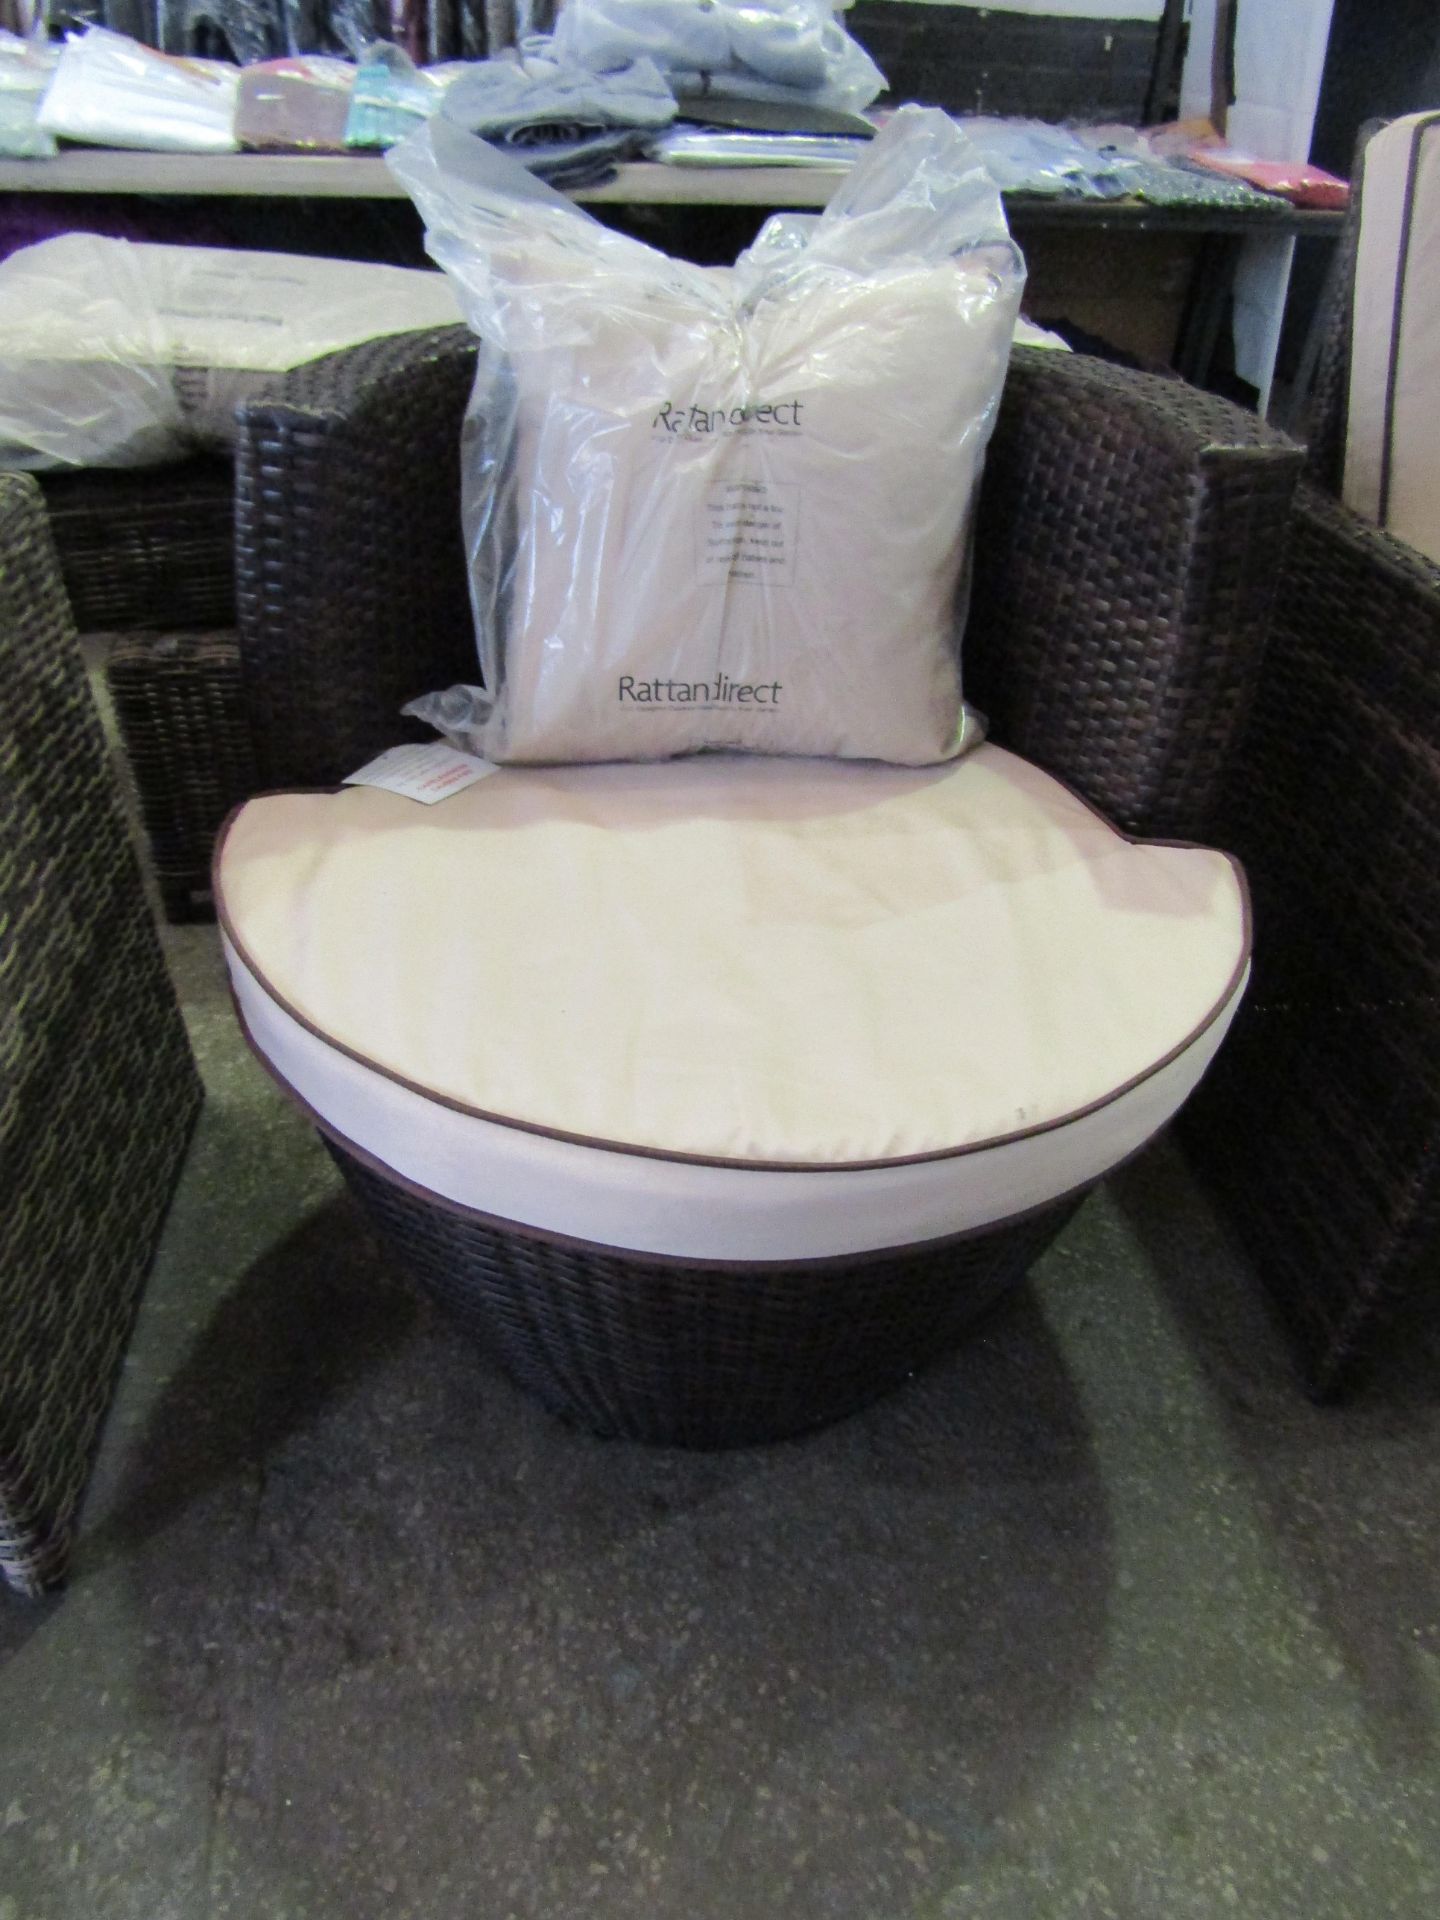 Rattan Direct Orlando Chair in Chocolate Mix and Coffee Cream RRP 599This item looks to be in good